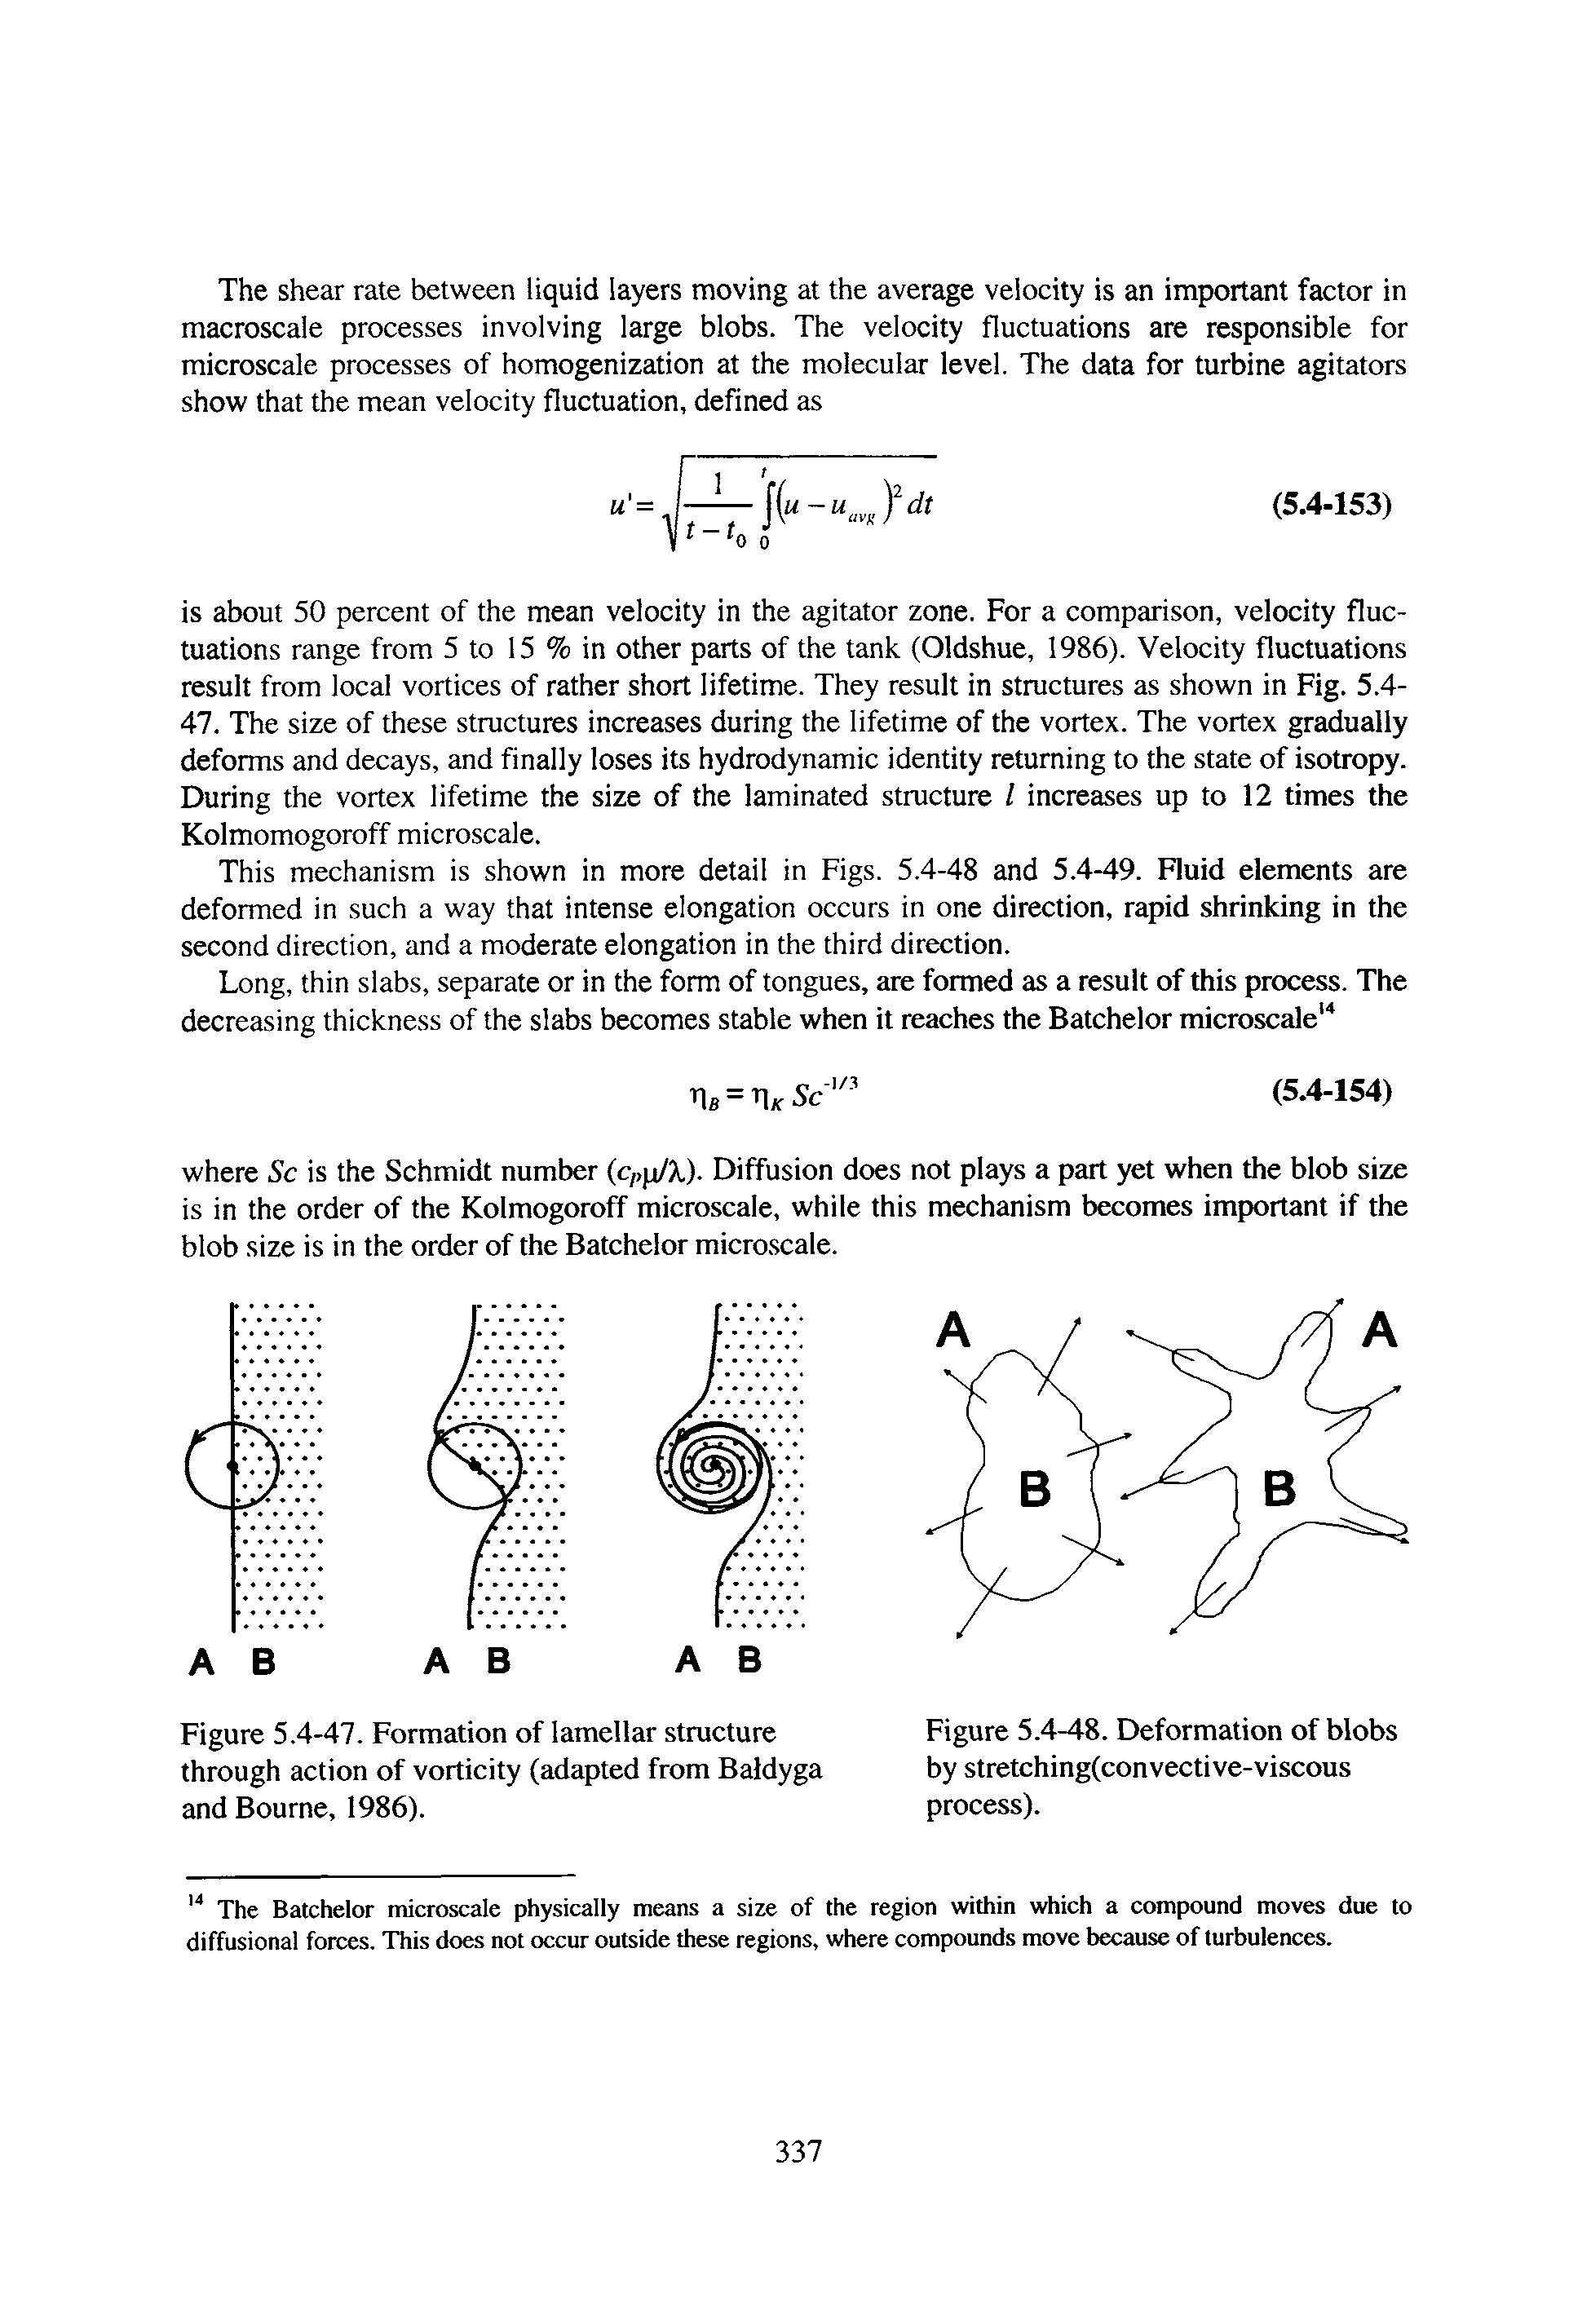 Figure 5.4-48. Deformation of blobs by stretching(convective-viscous process).